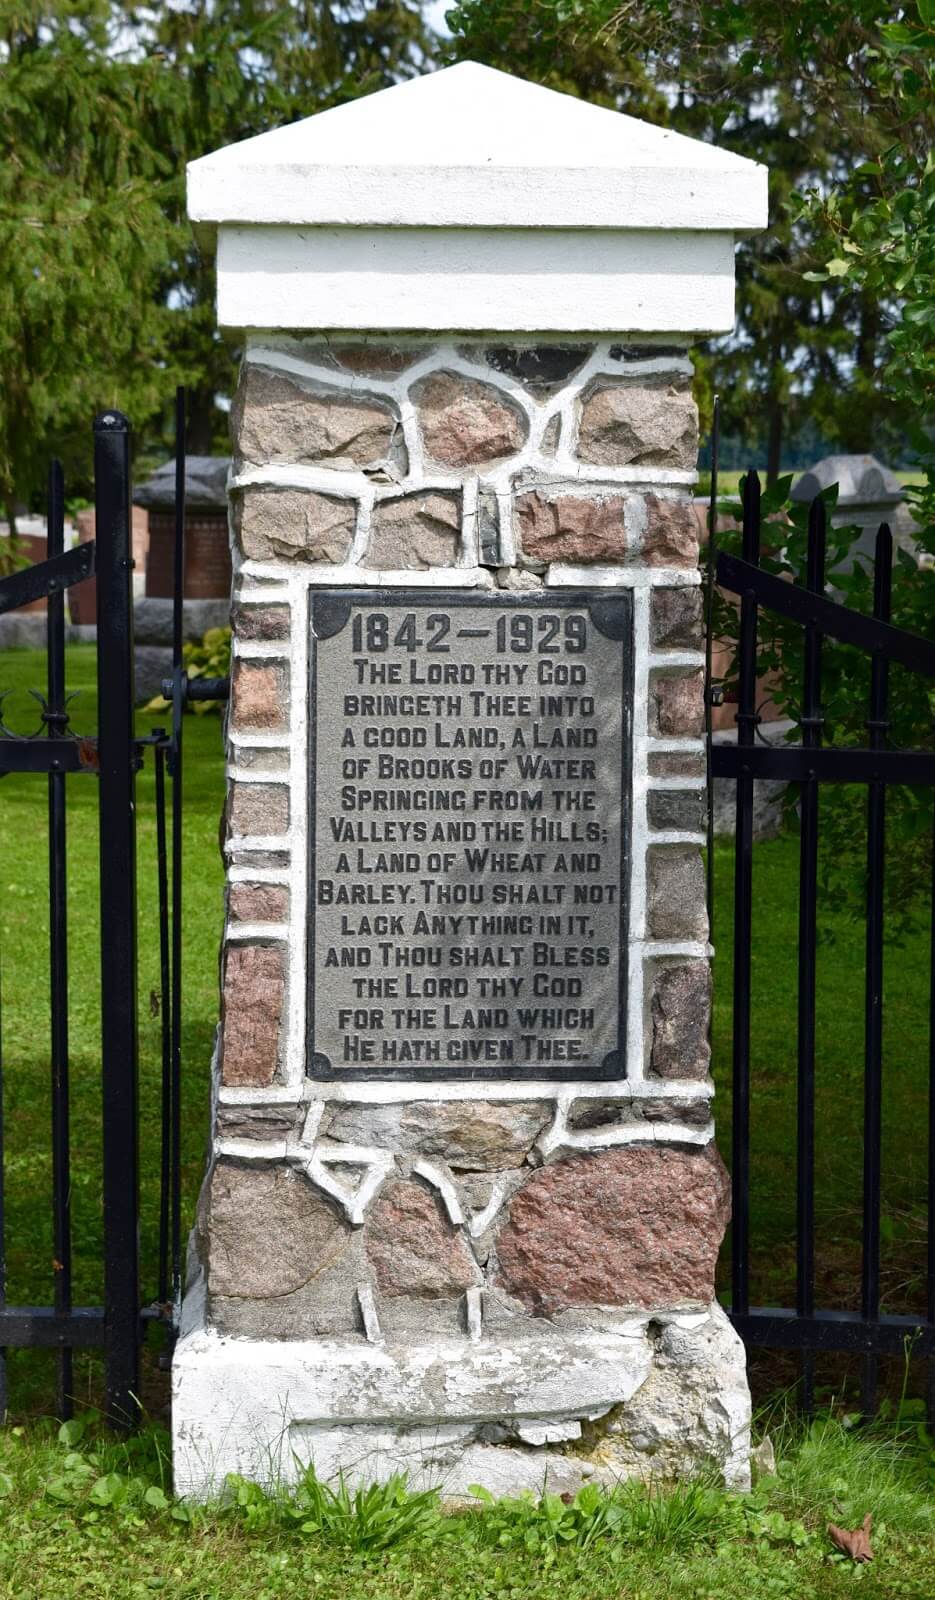 A plaque stating 1842-1929, The Lord thy God bringeth thee into a good land, a land of brooks of water springing from the valleys and the hills; a land of wheat and barley. Thou shalt not lack anything in it, and thou shalt bless the Lord thy God for the land which He hath given thee.